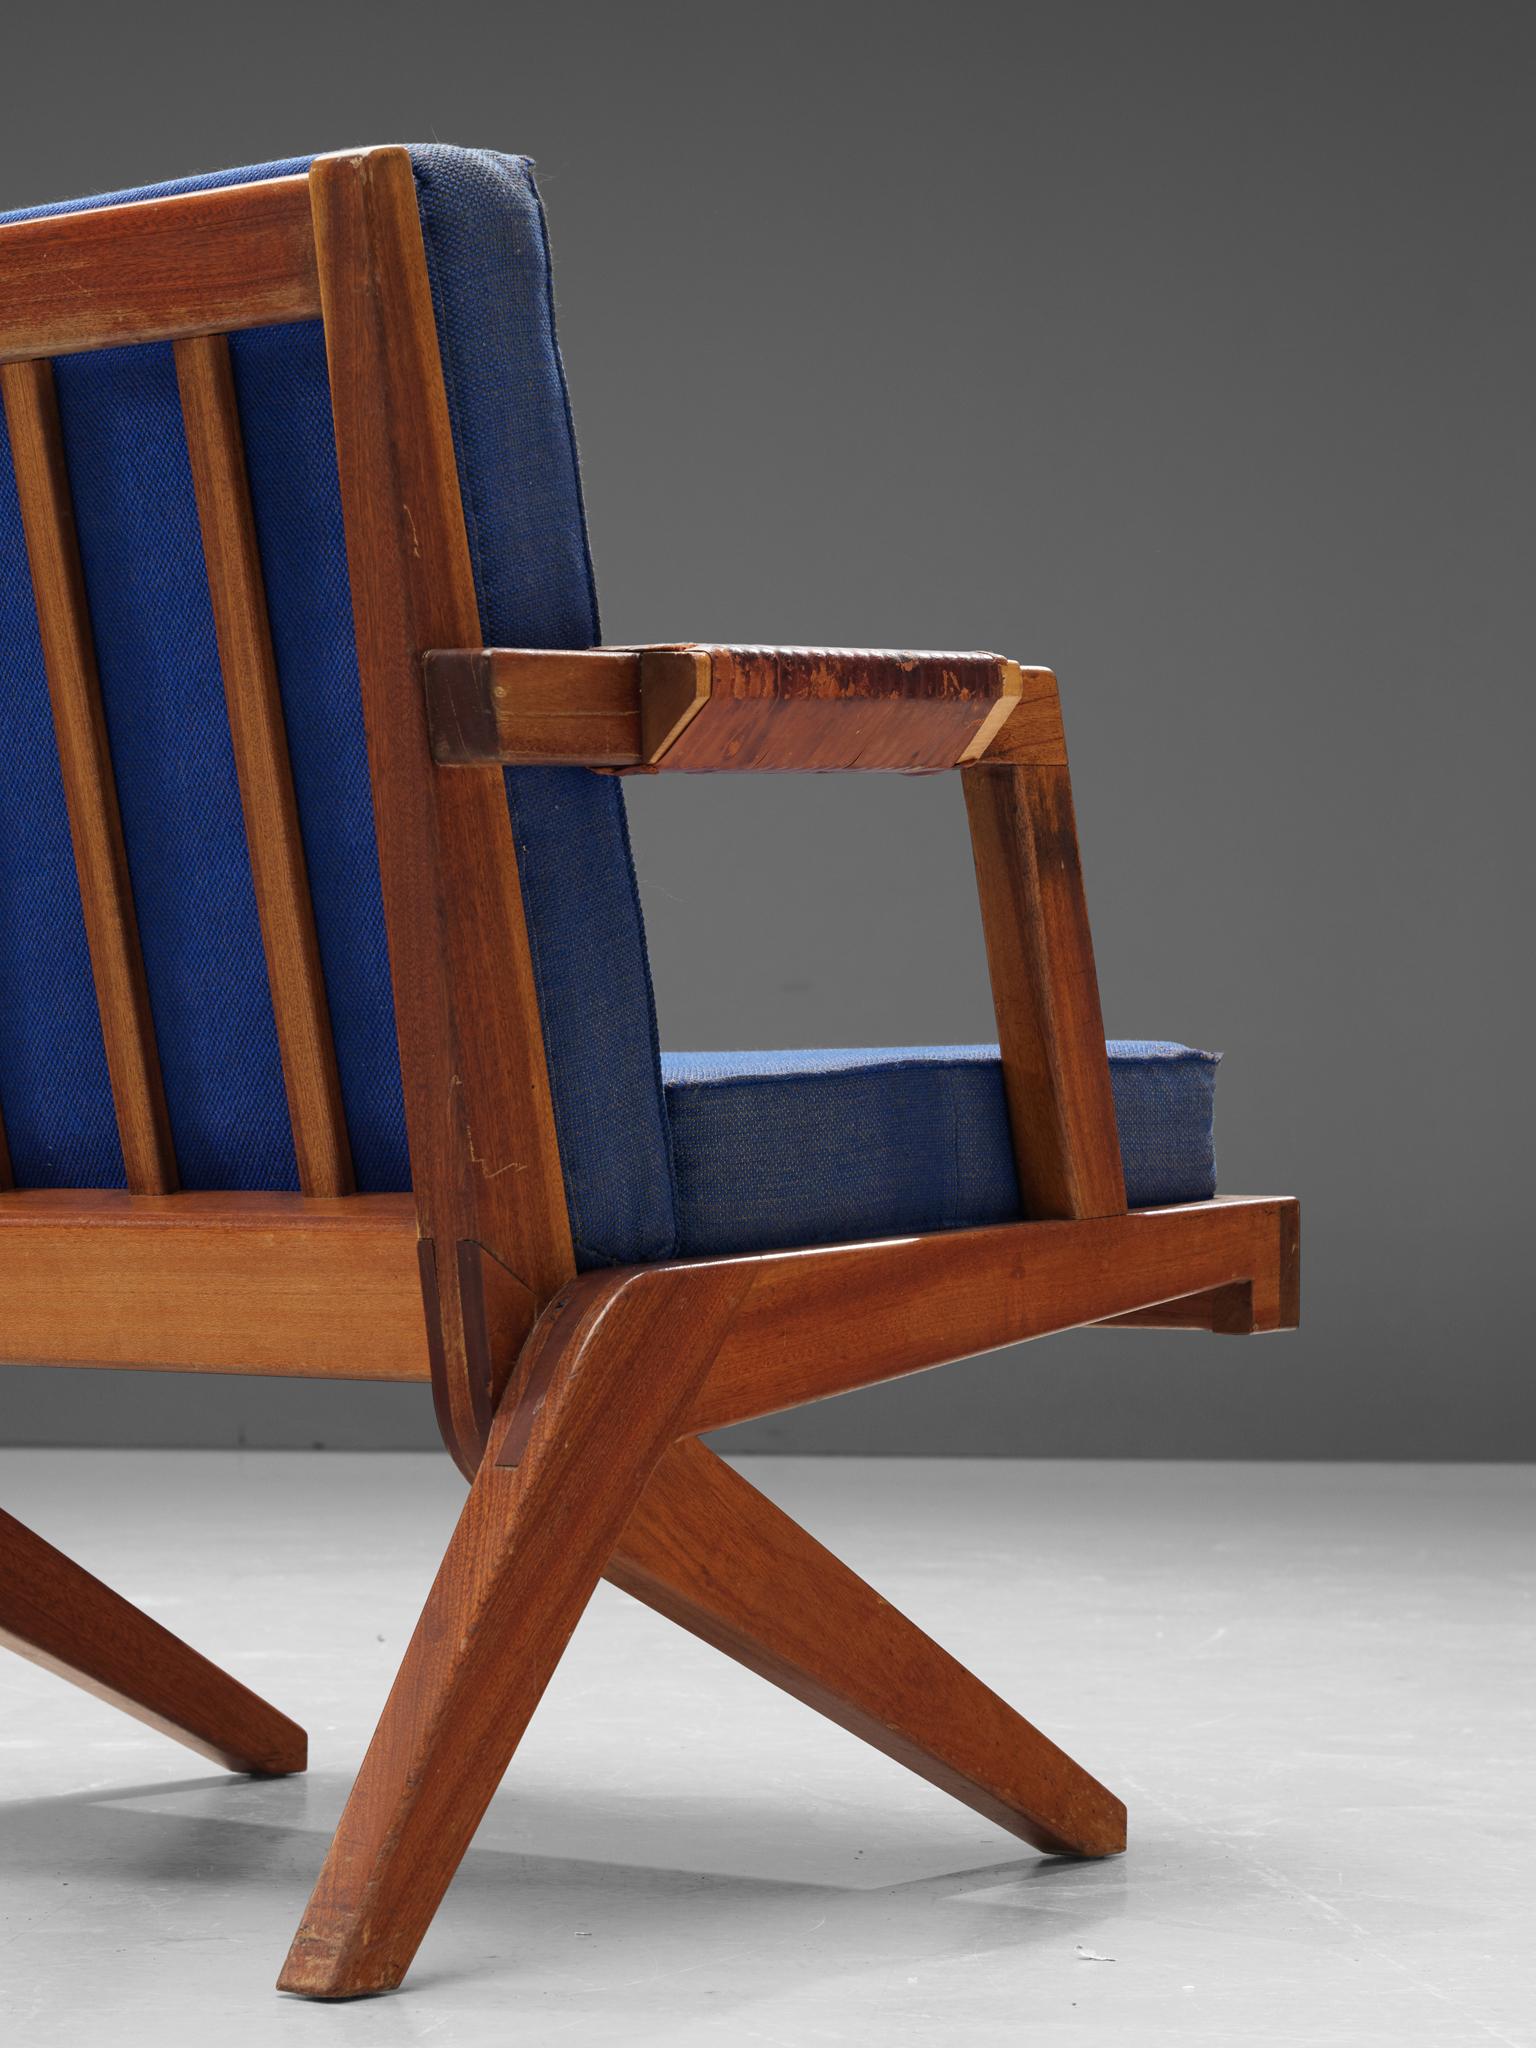 Olavi Hanninen Pair of 'Bumerang' Chairs with Kingsblue Upholstery 1